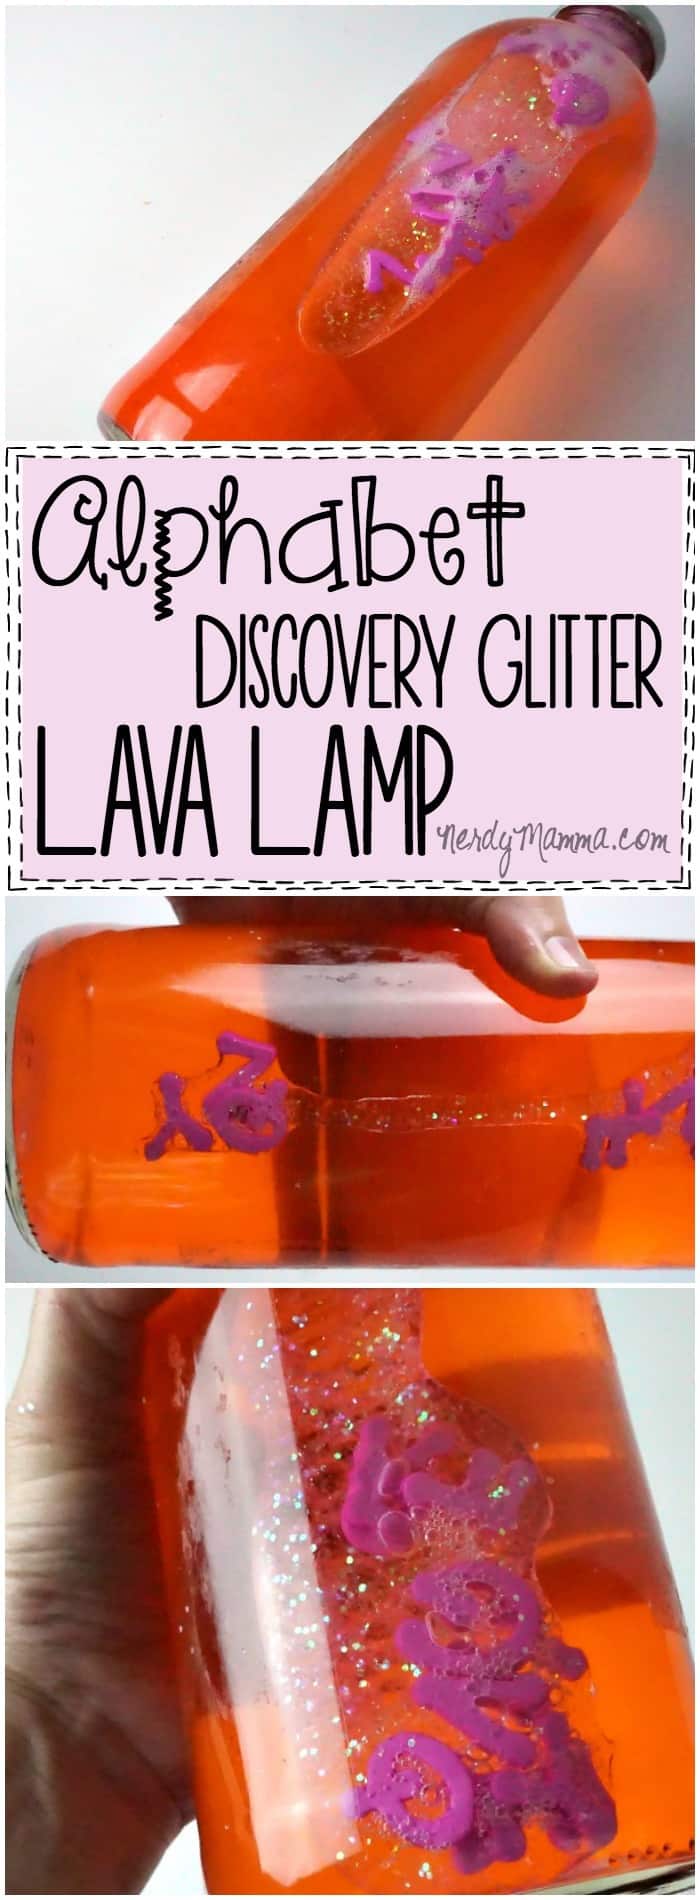 I absolutely love this alphabet discovery glitter lava lamp. !t's so cute--and what a fun way for kiddos to get familiar with the abc's!